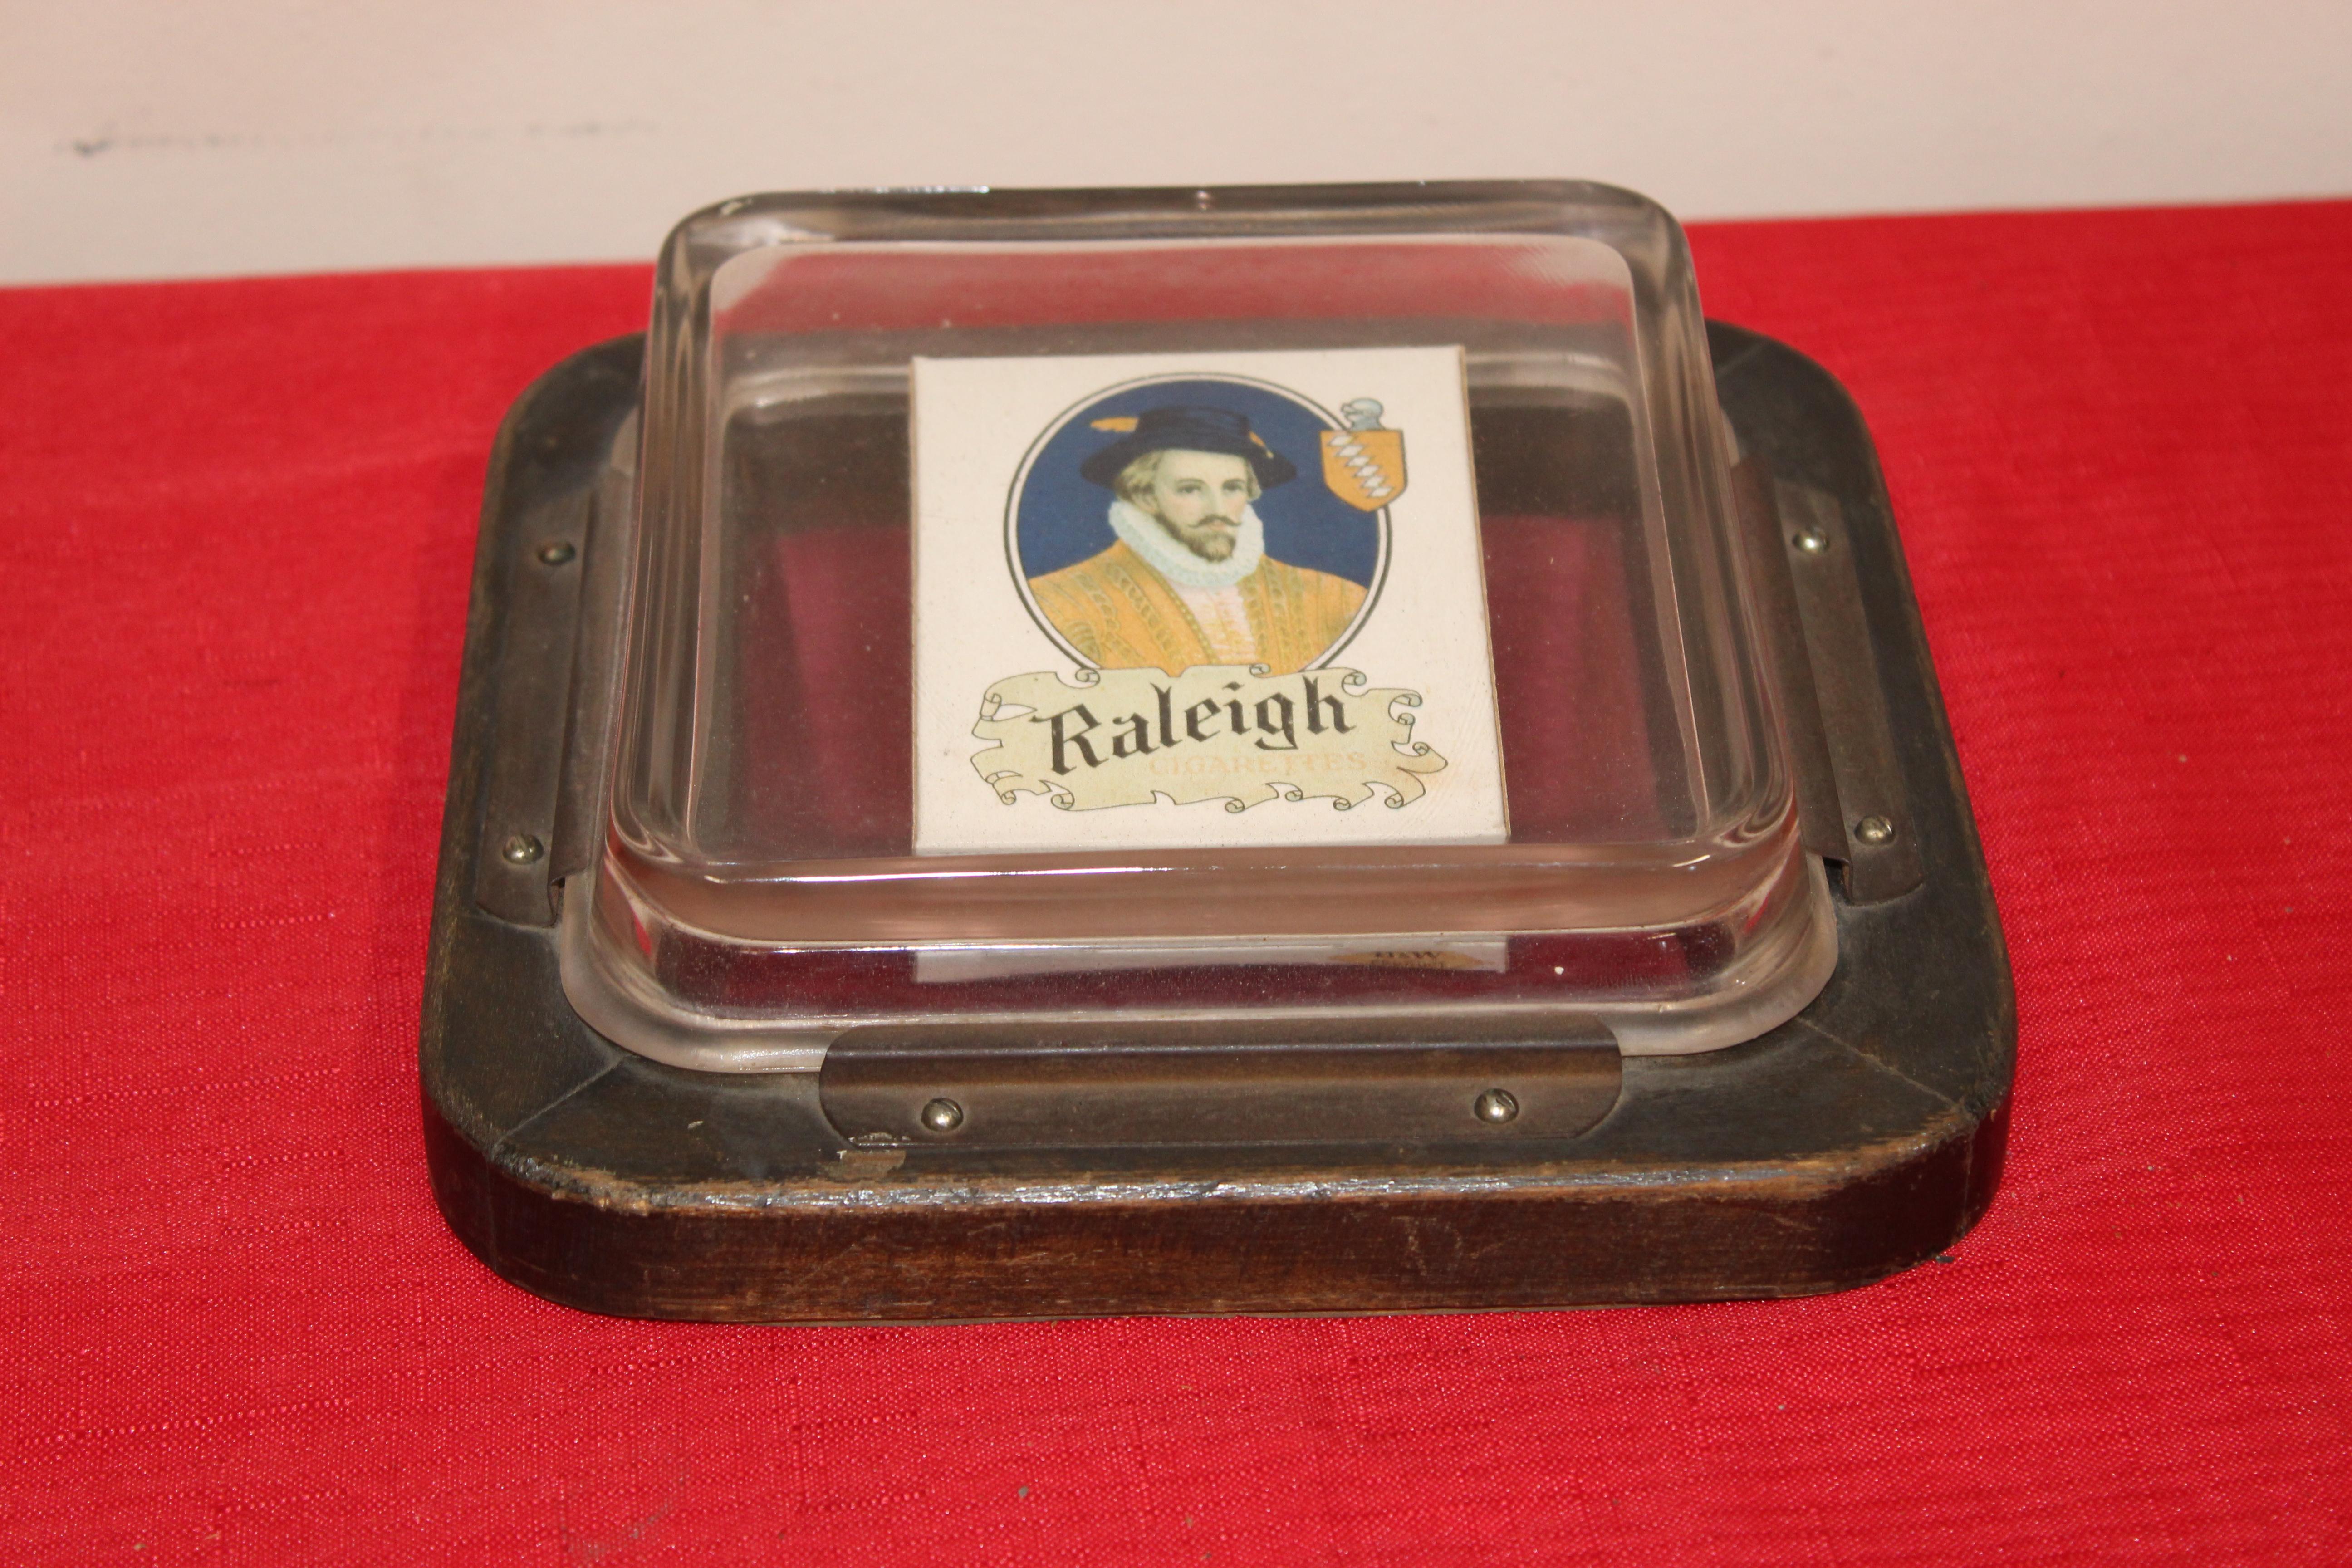 These were used for a variety of things in tobacco shops. Putting customers change in it or sometimes free matches for customers and as always a handy ashtray. Raleigh cigarette pack is stabilized under the glass. Has four brass plates hold the